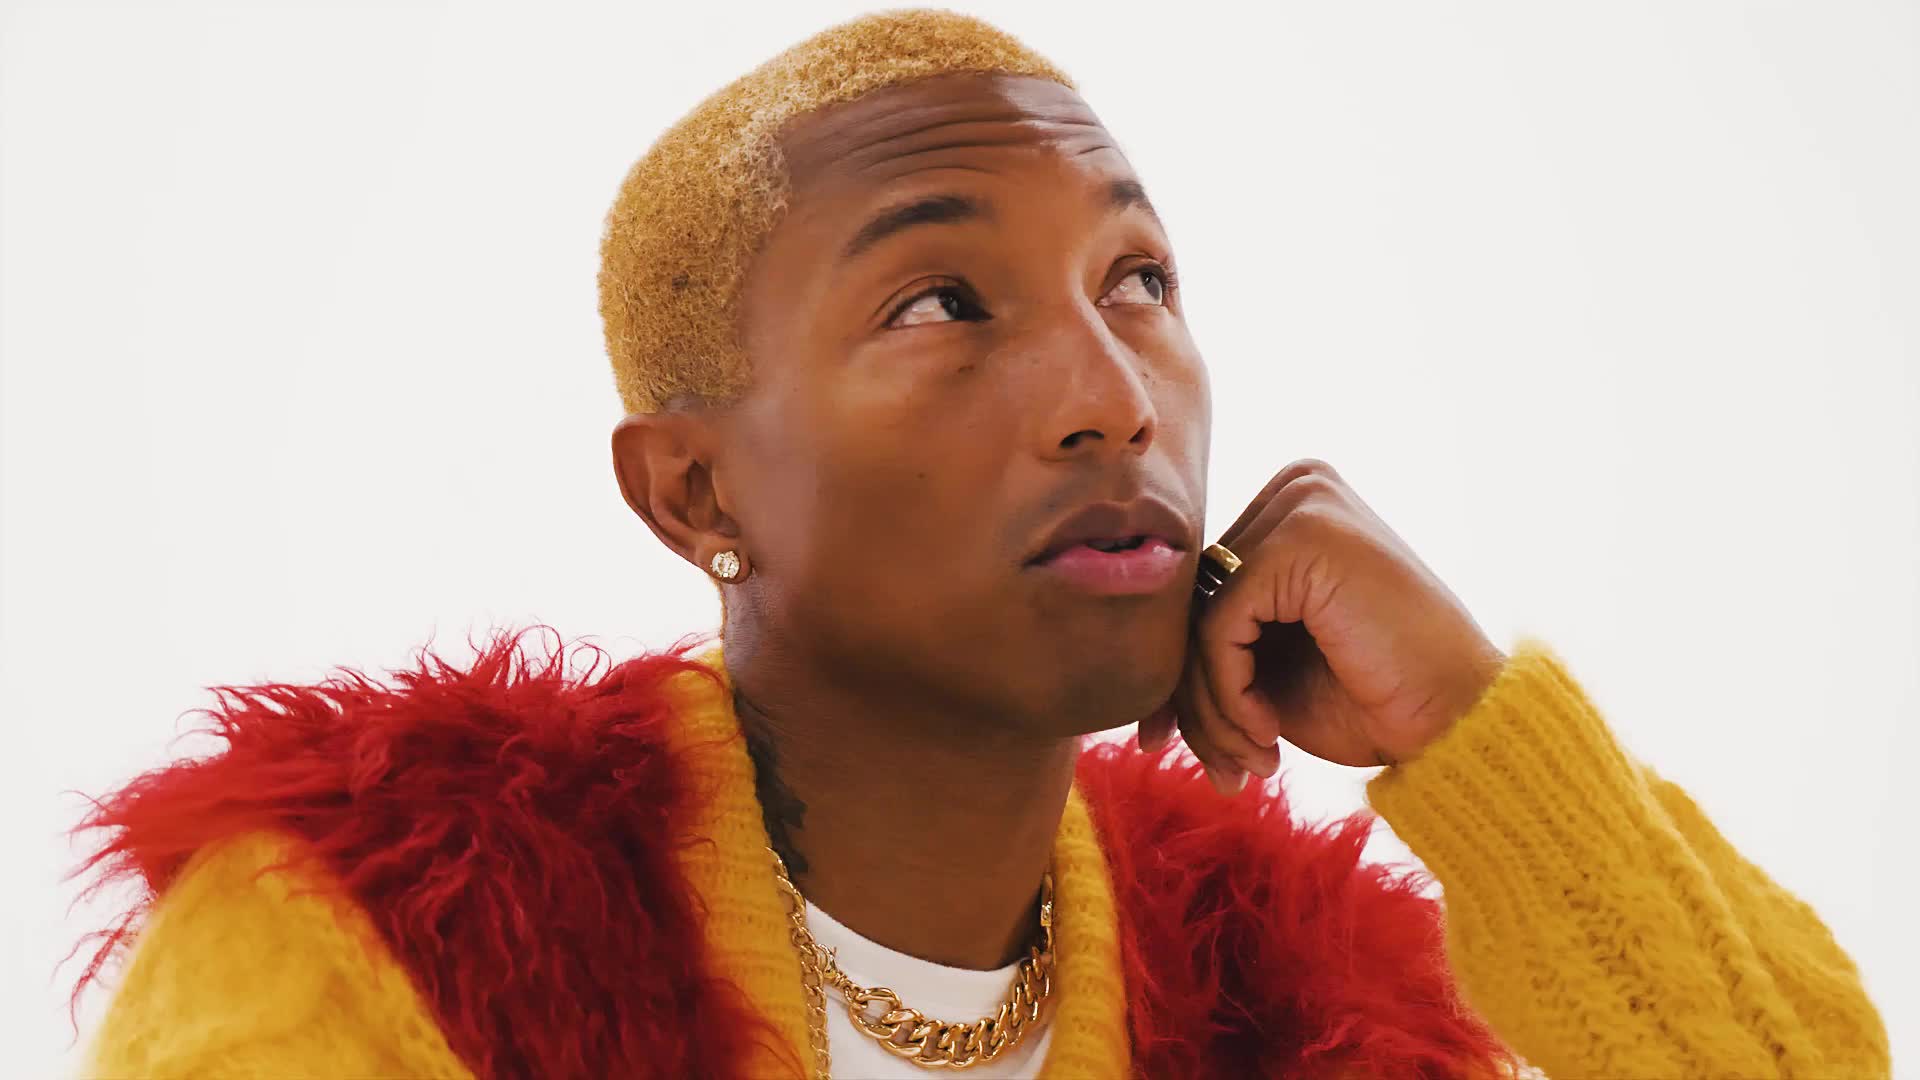 Pharrell Williams GQ Exclusive: The Making of G I R L